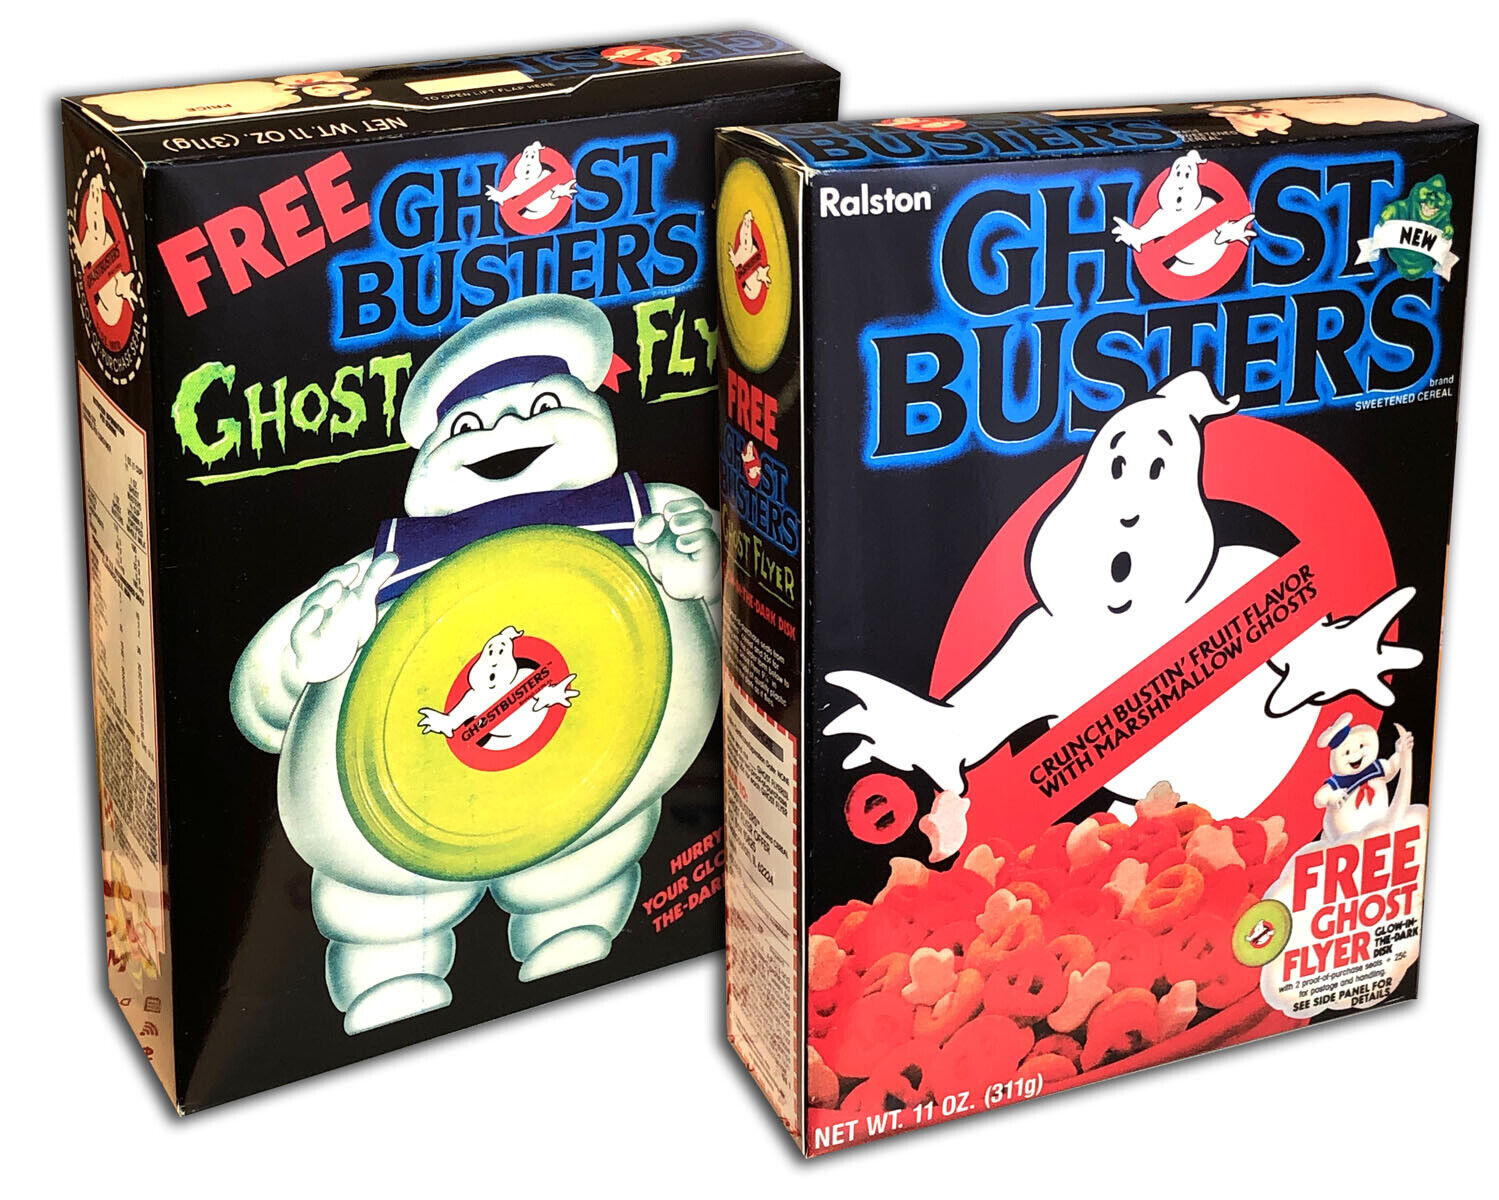 Ralston GHOSTBUSTERS Cereal Box (BOX ONLY)